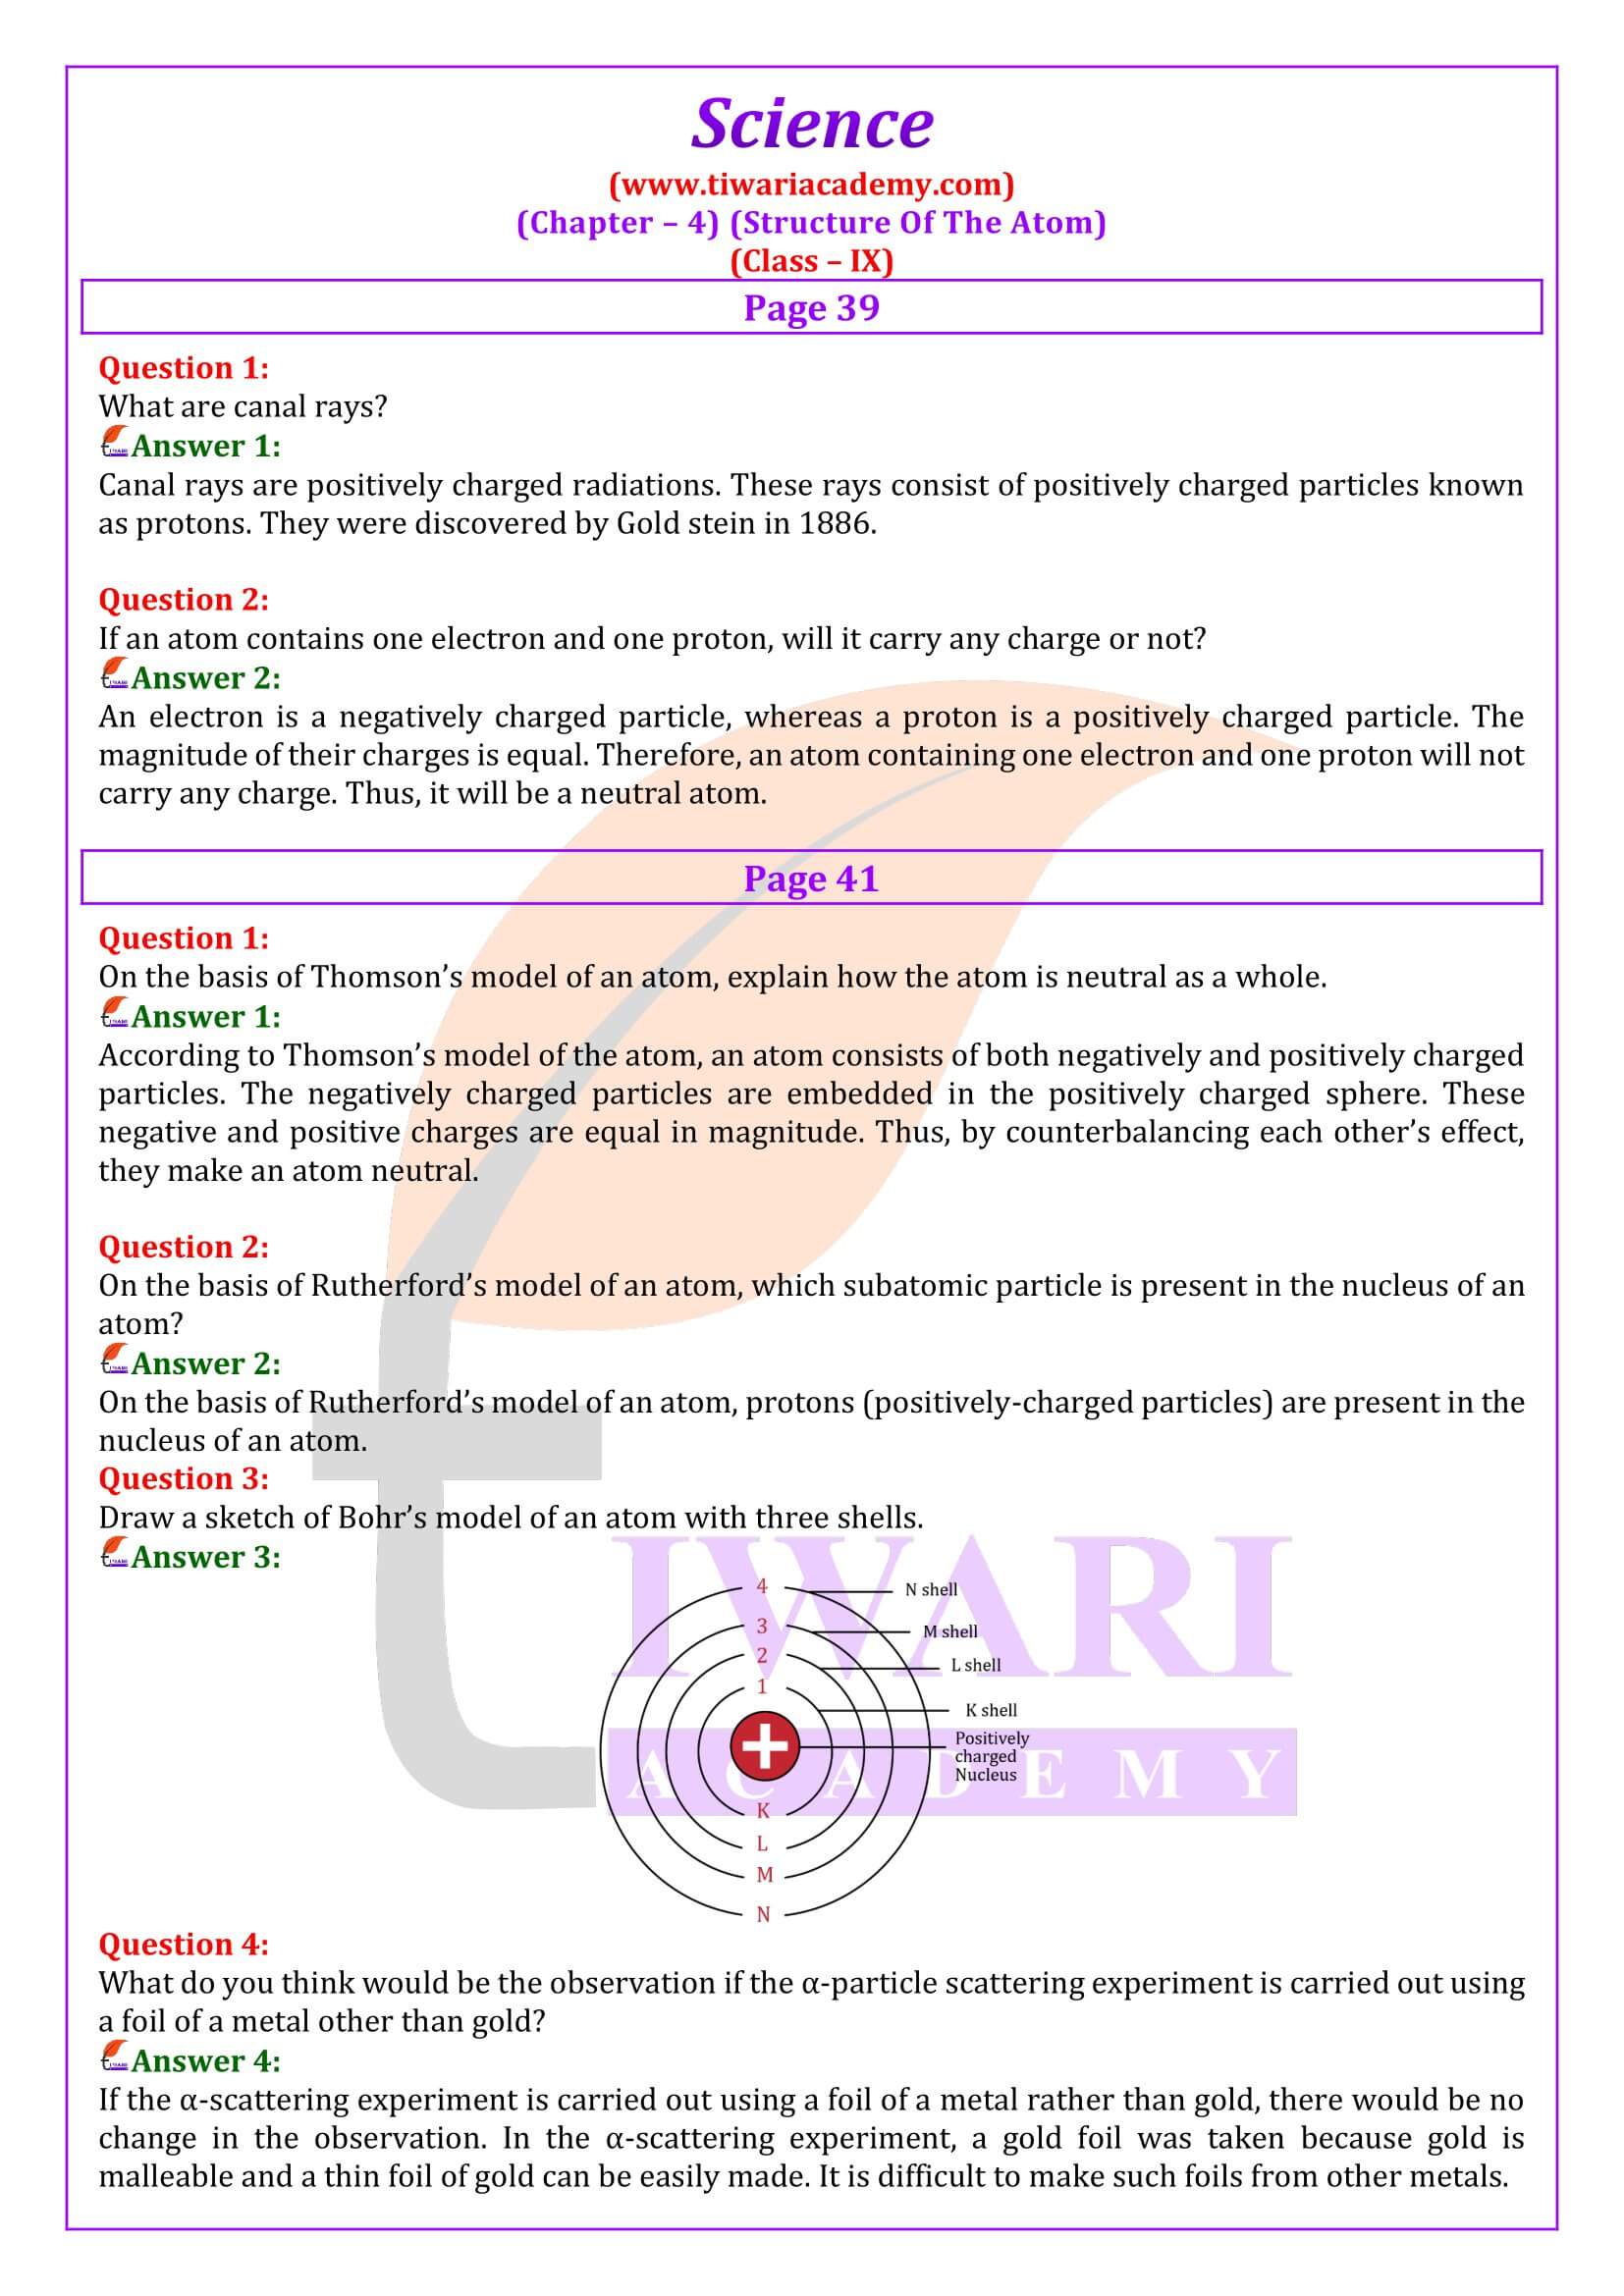 NCERT Solutions for Class 9 Science Chapter 4 Intext Questions